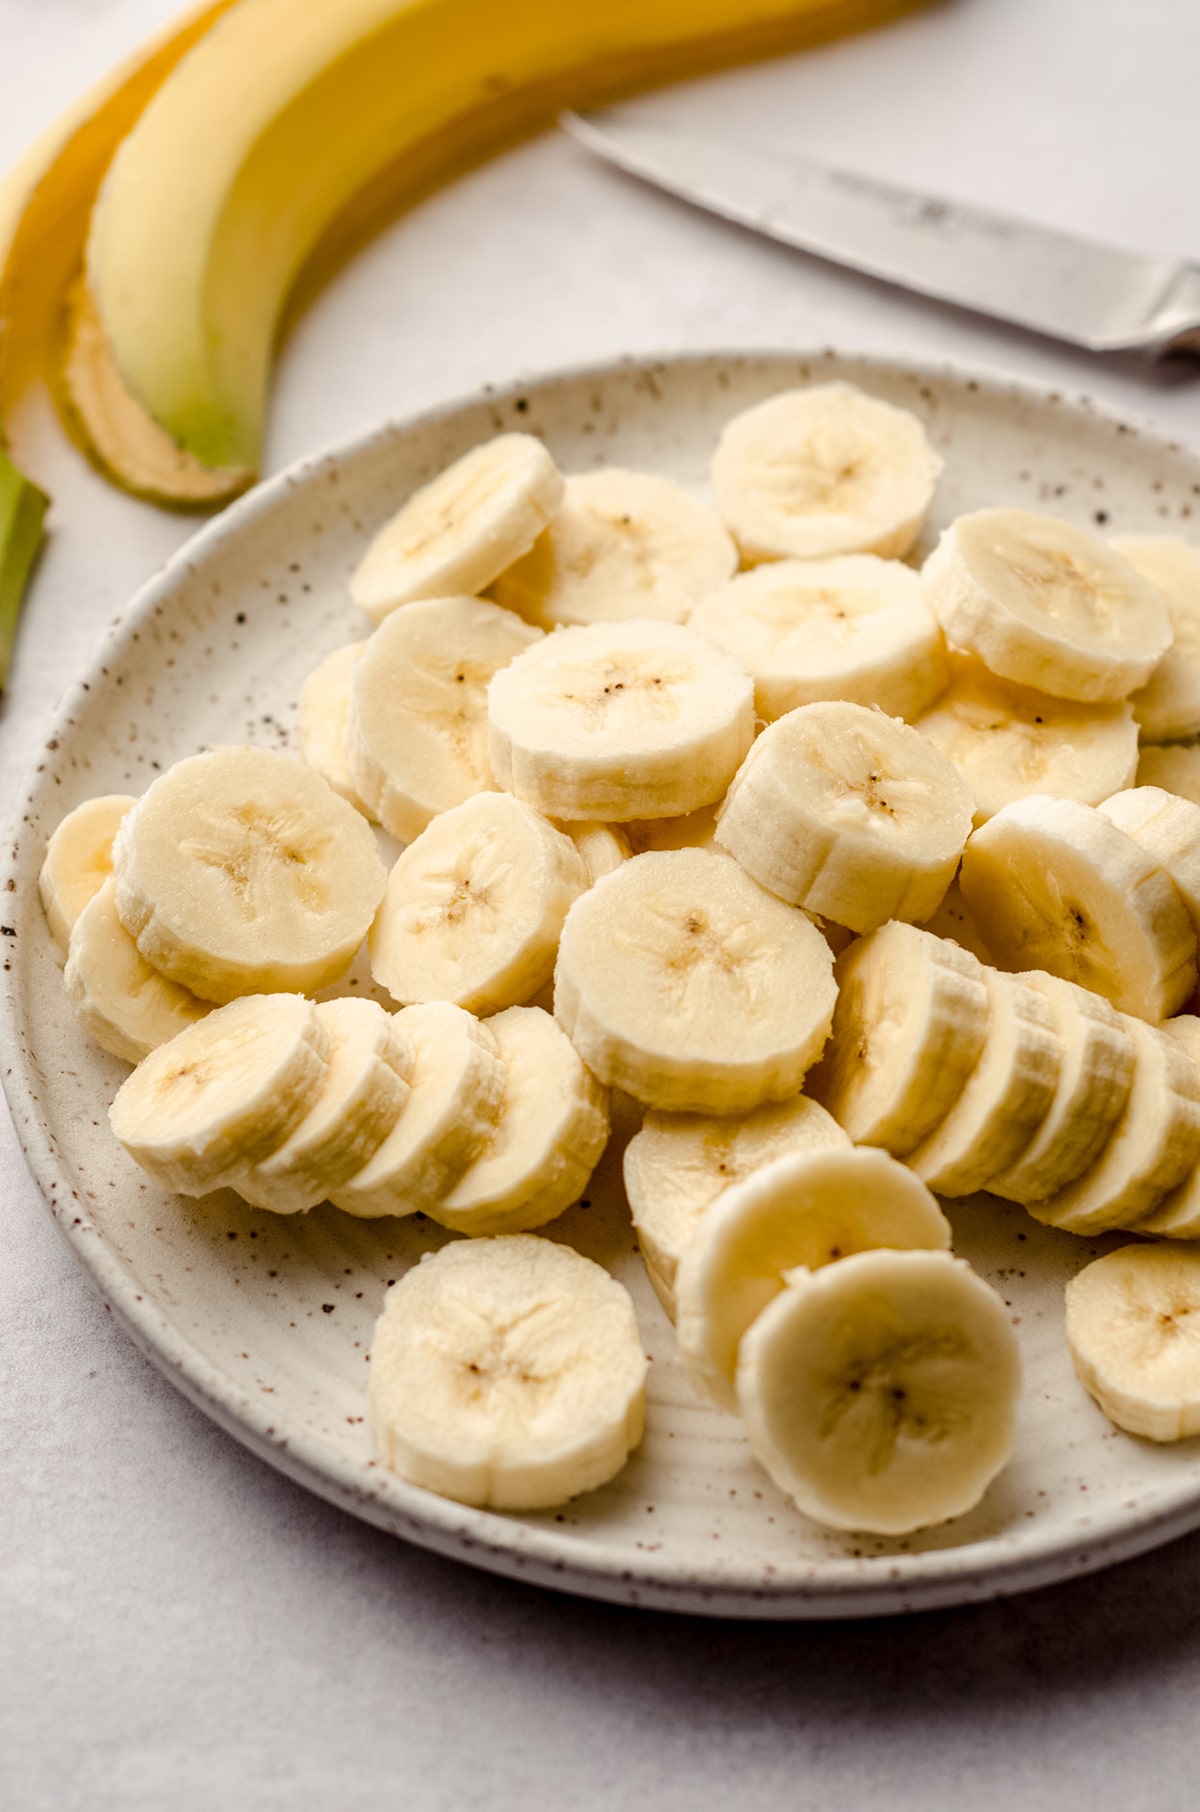 slices of banana on a plate